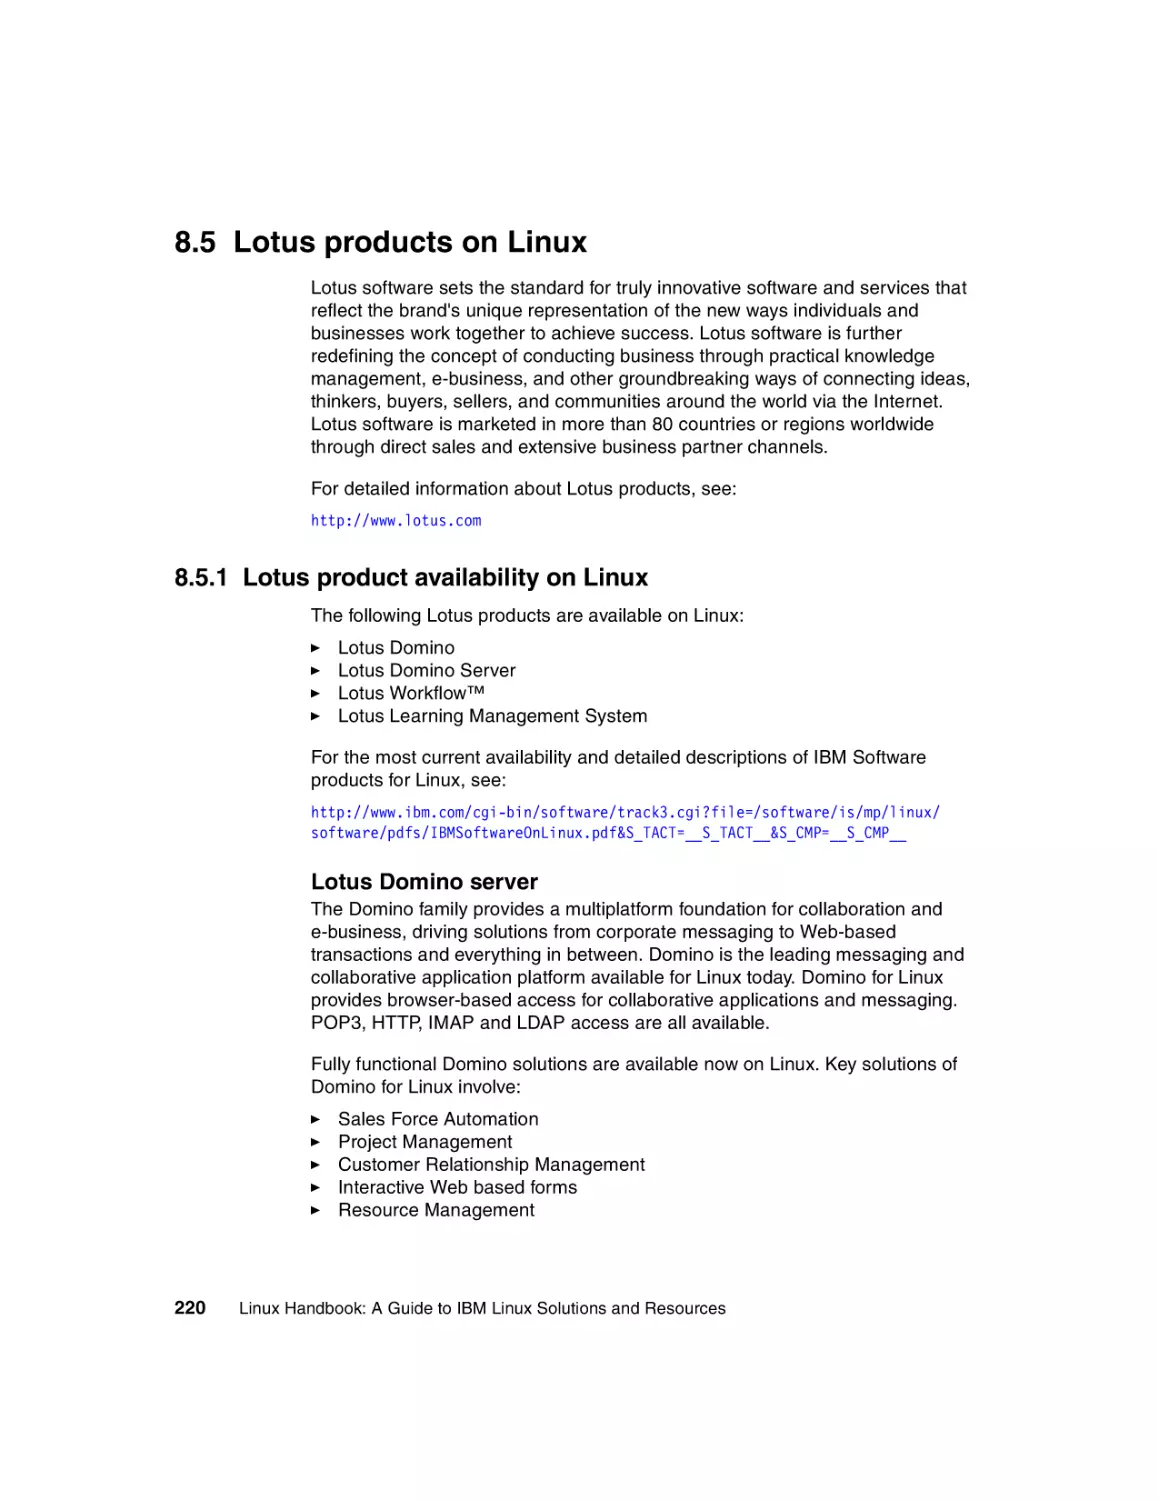 8.5 Lotus products on Linux
8.5.1 Lotus product availability on Linux